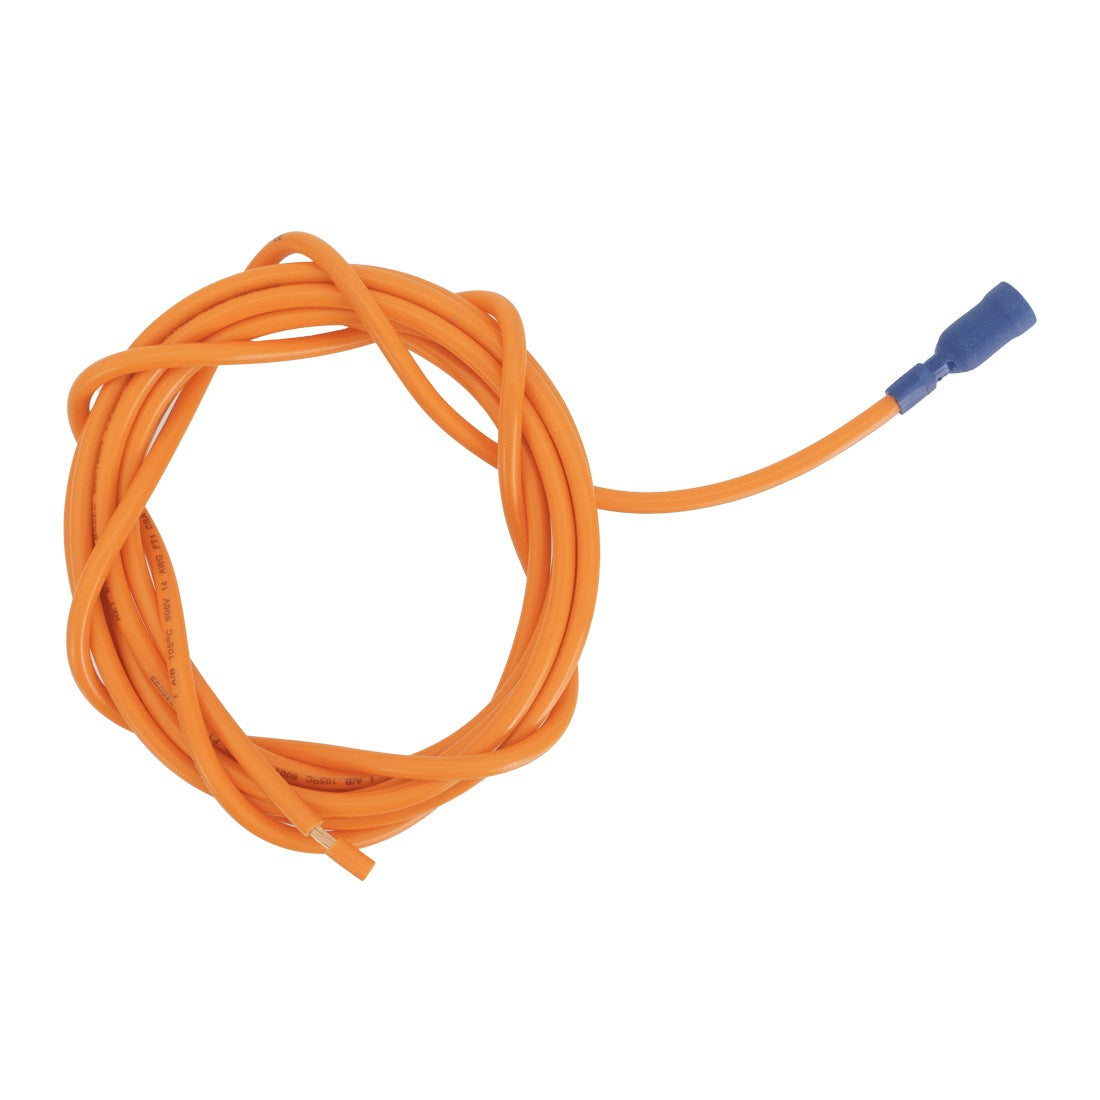 Spring Europe Battery Powered Pump Controller V16 - Charging Orange Cord View